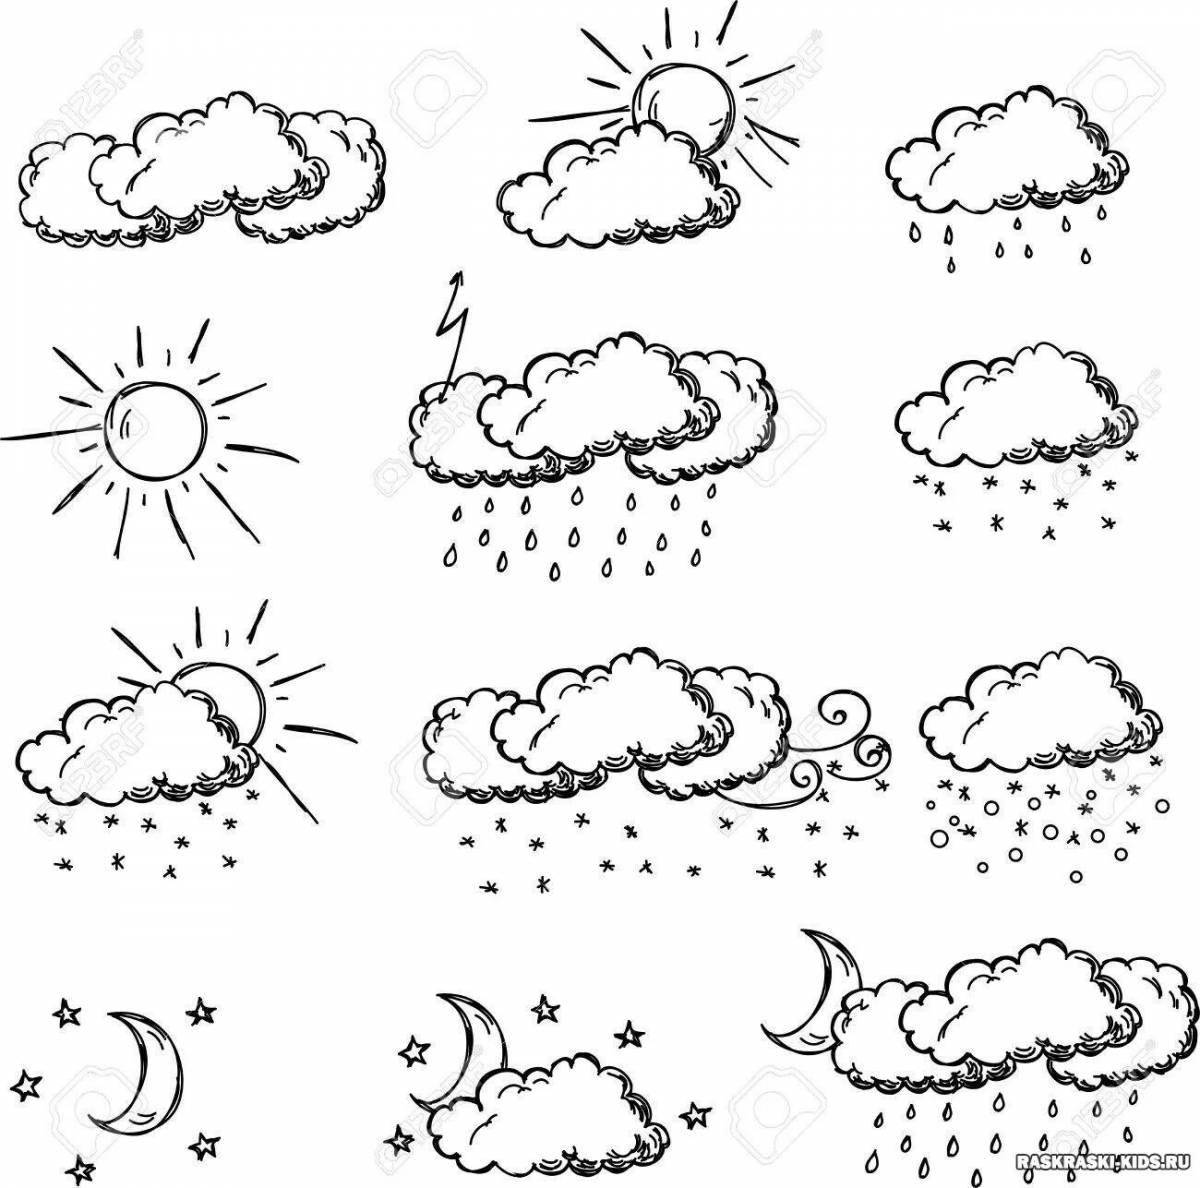 Happy weather forecast coloring page